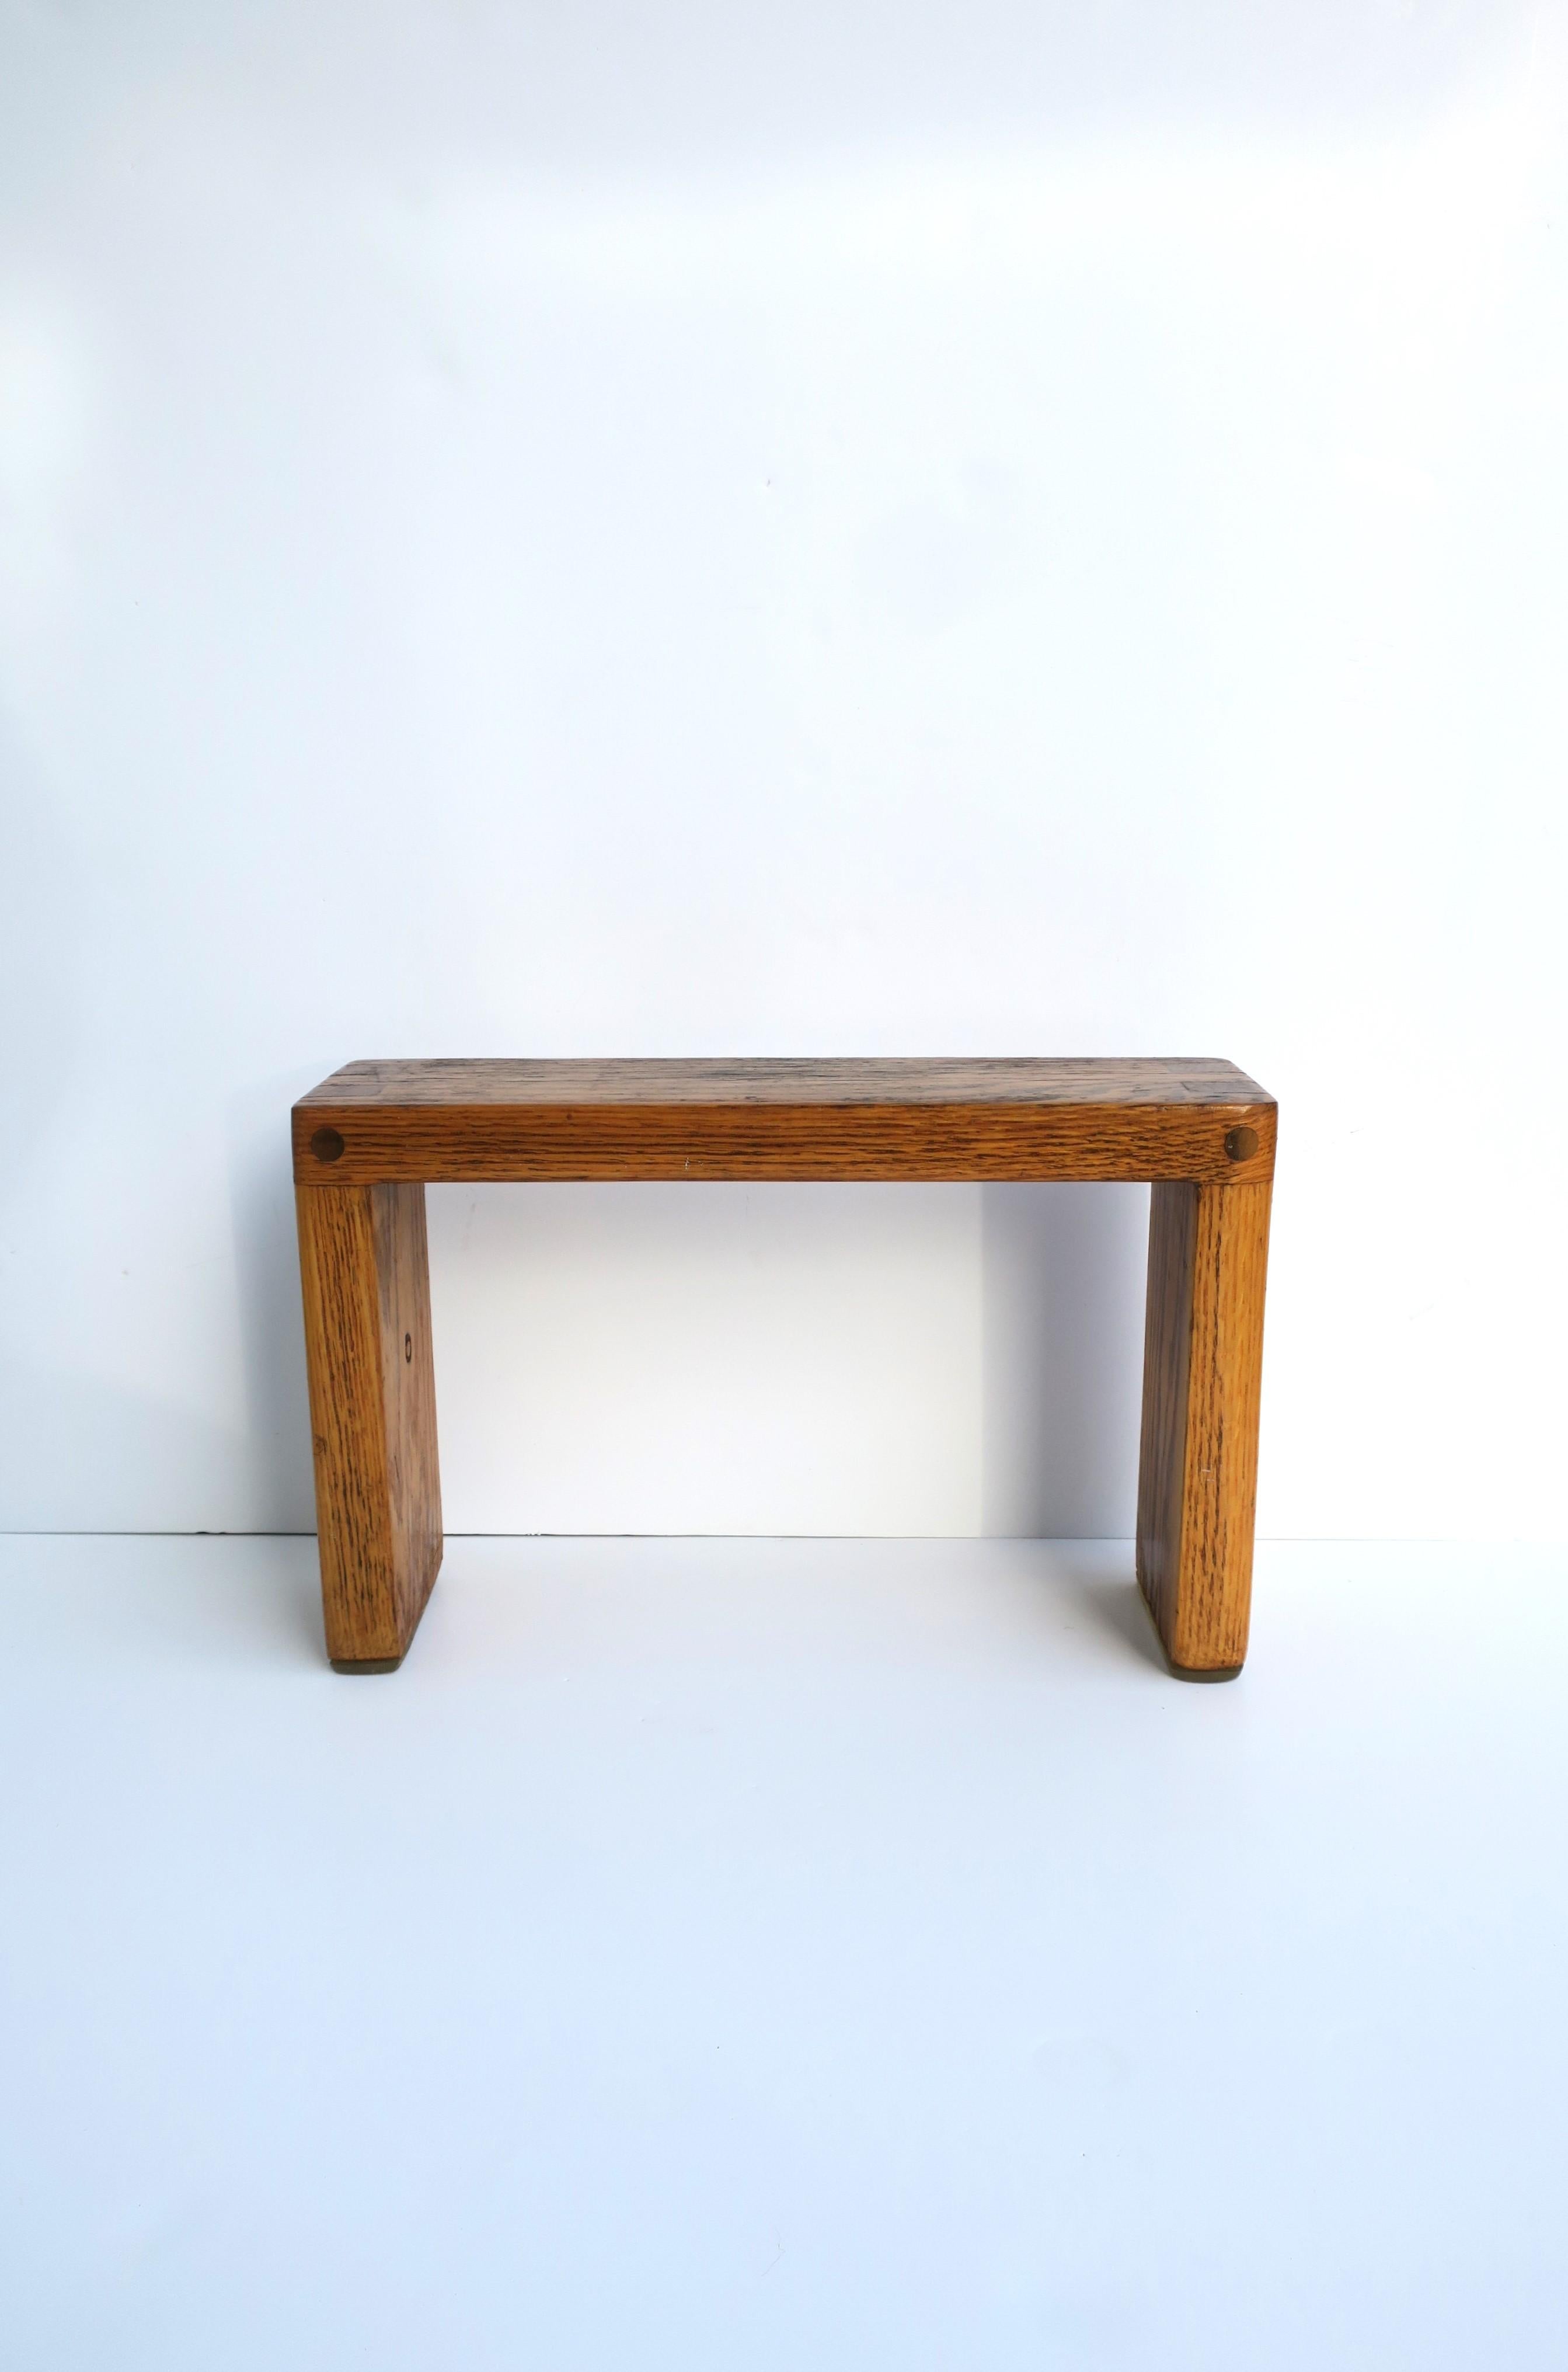 A small, solid, rectangular oak wood stand, beautifully made, circa late-20th century. Piece may work well to hold a cocktail, beer, beverage, etc., small books, a plant, etc. Many options. Dimensions: 4.13